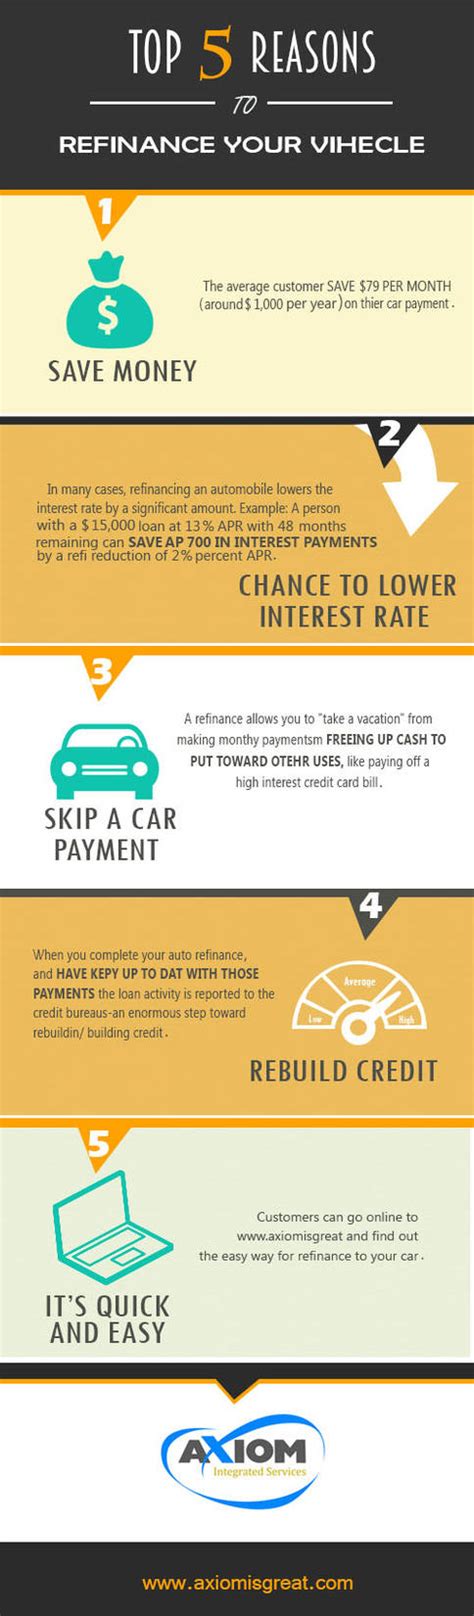 Top 5 Reasons To Refinance Your Vehicle By Nataliewrightacc On Deviantart